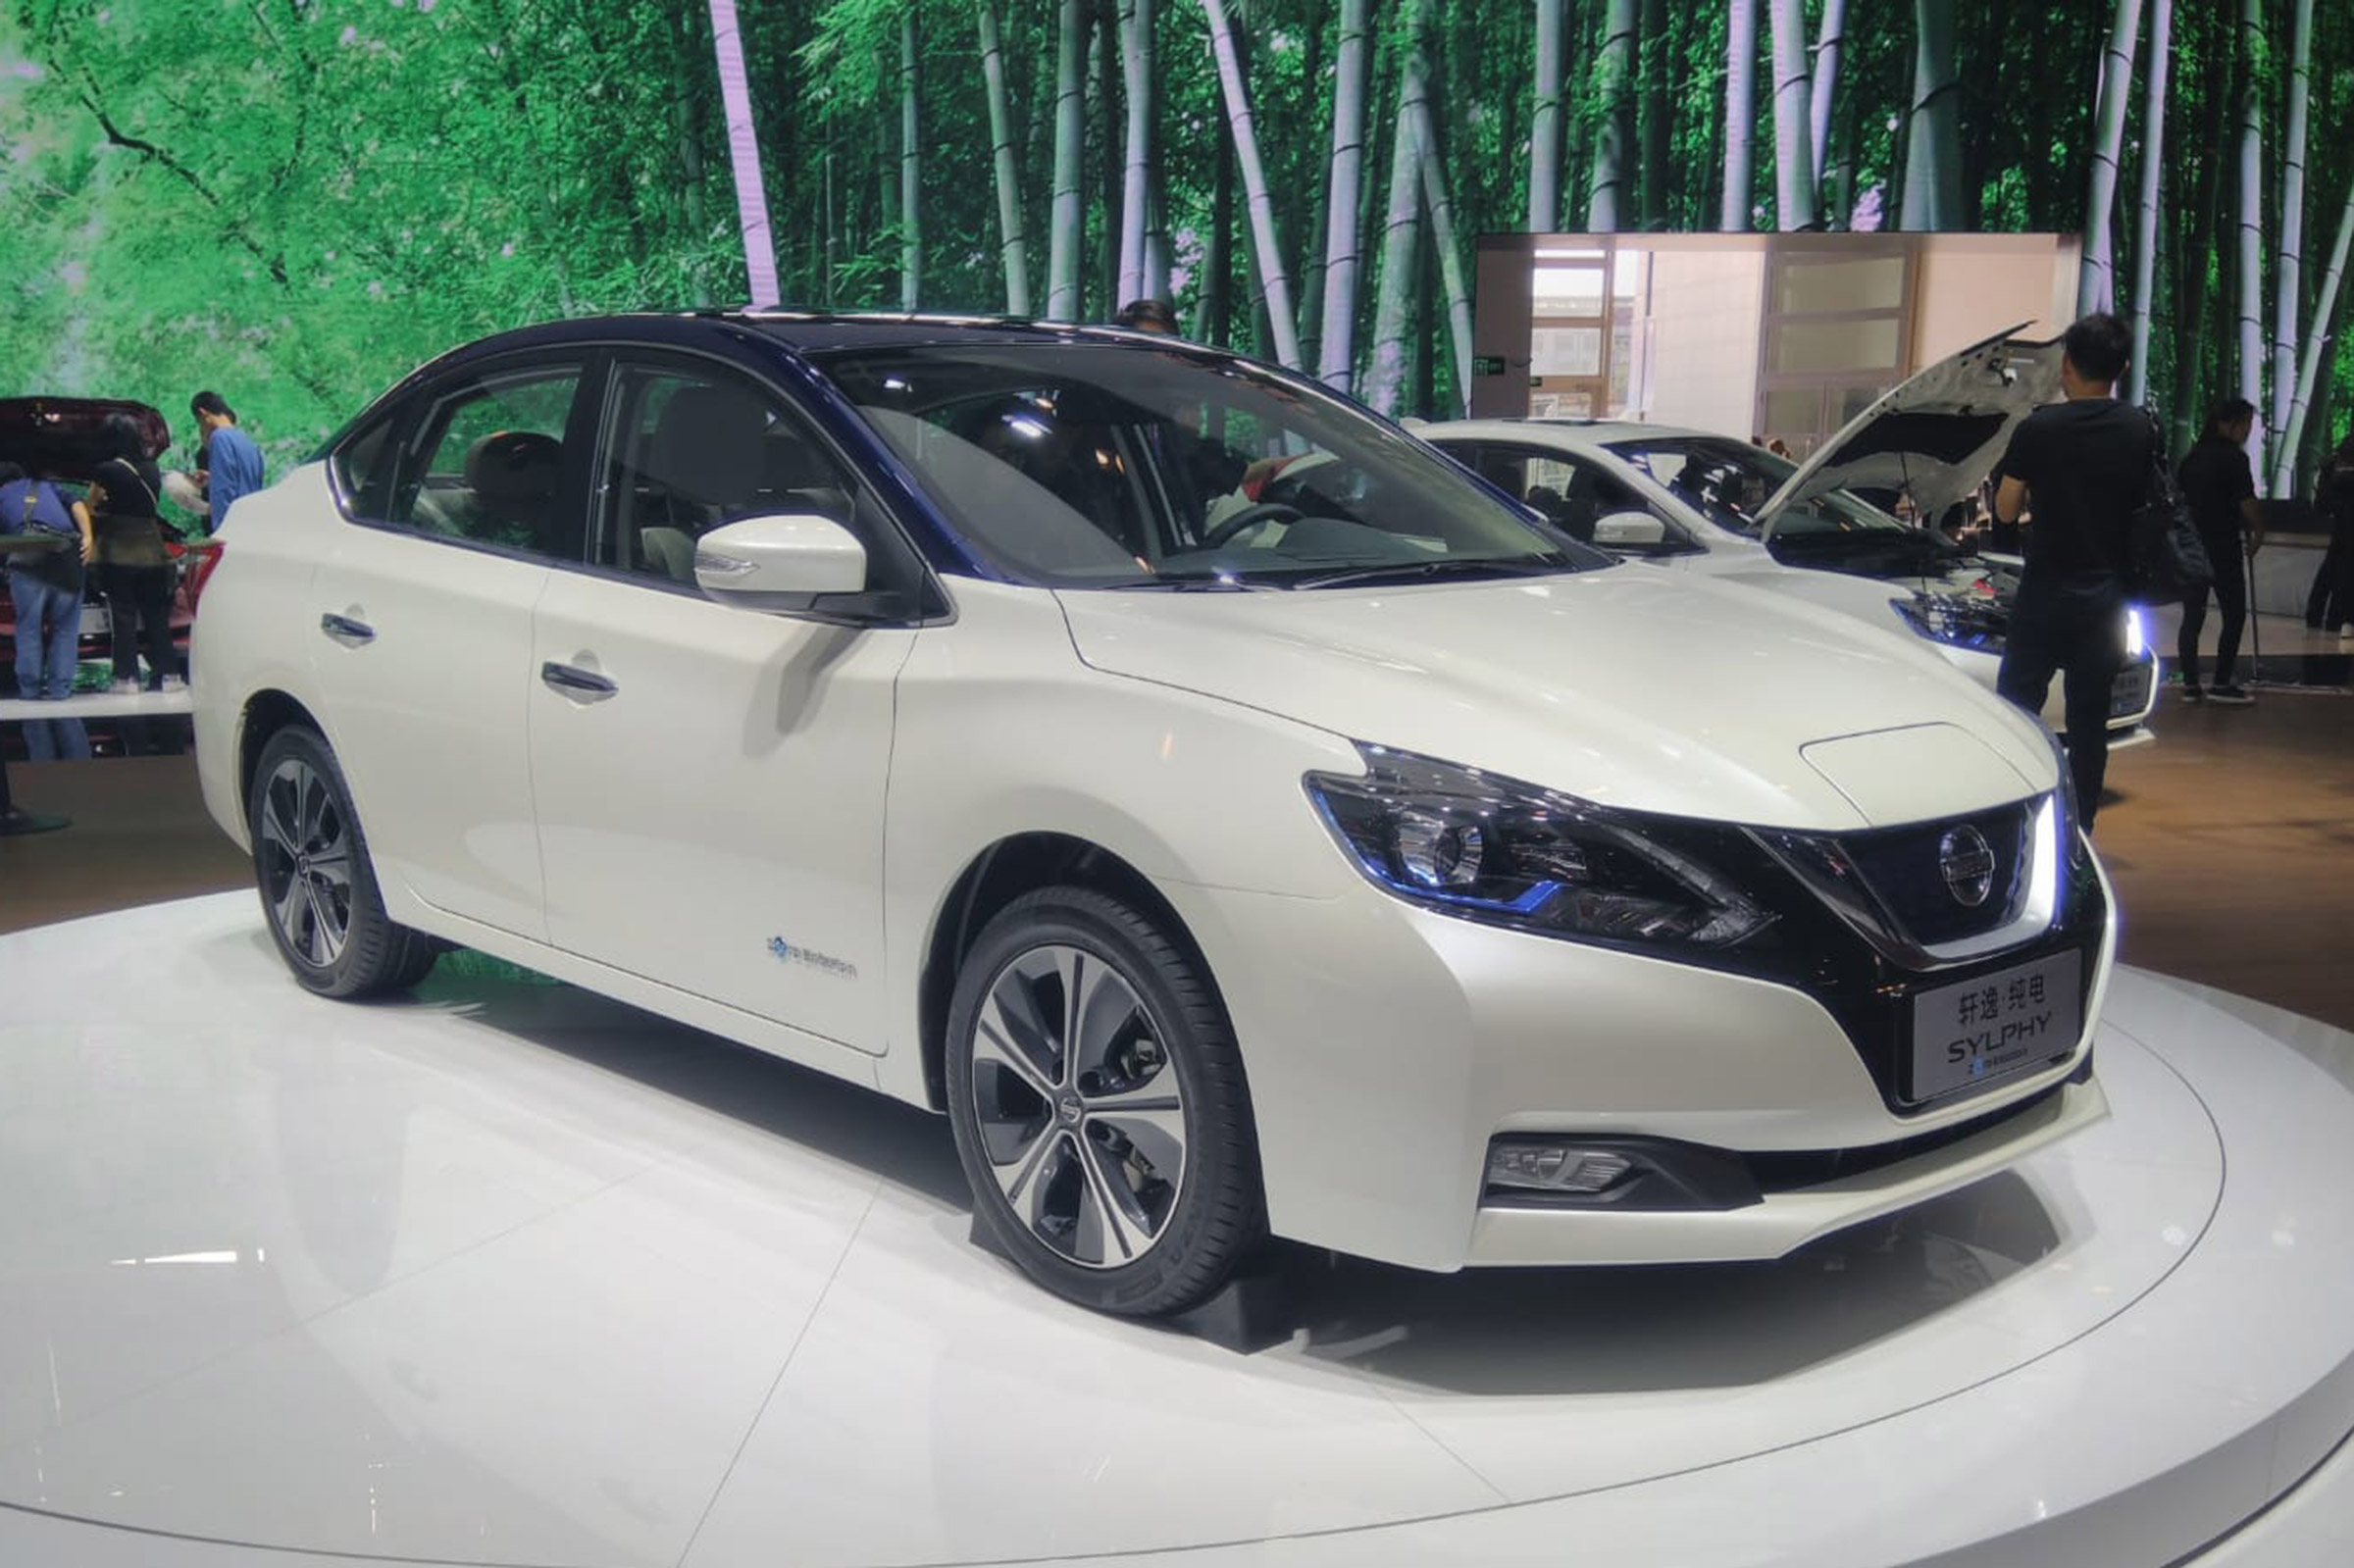 New Nissan Sylphy Ev Revealed For Chinese Market Auto Express